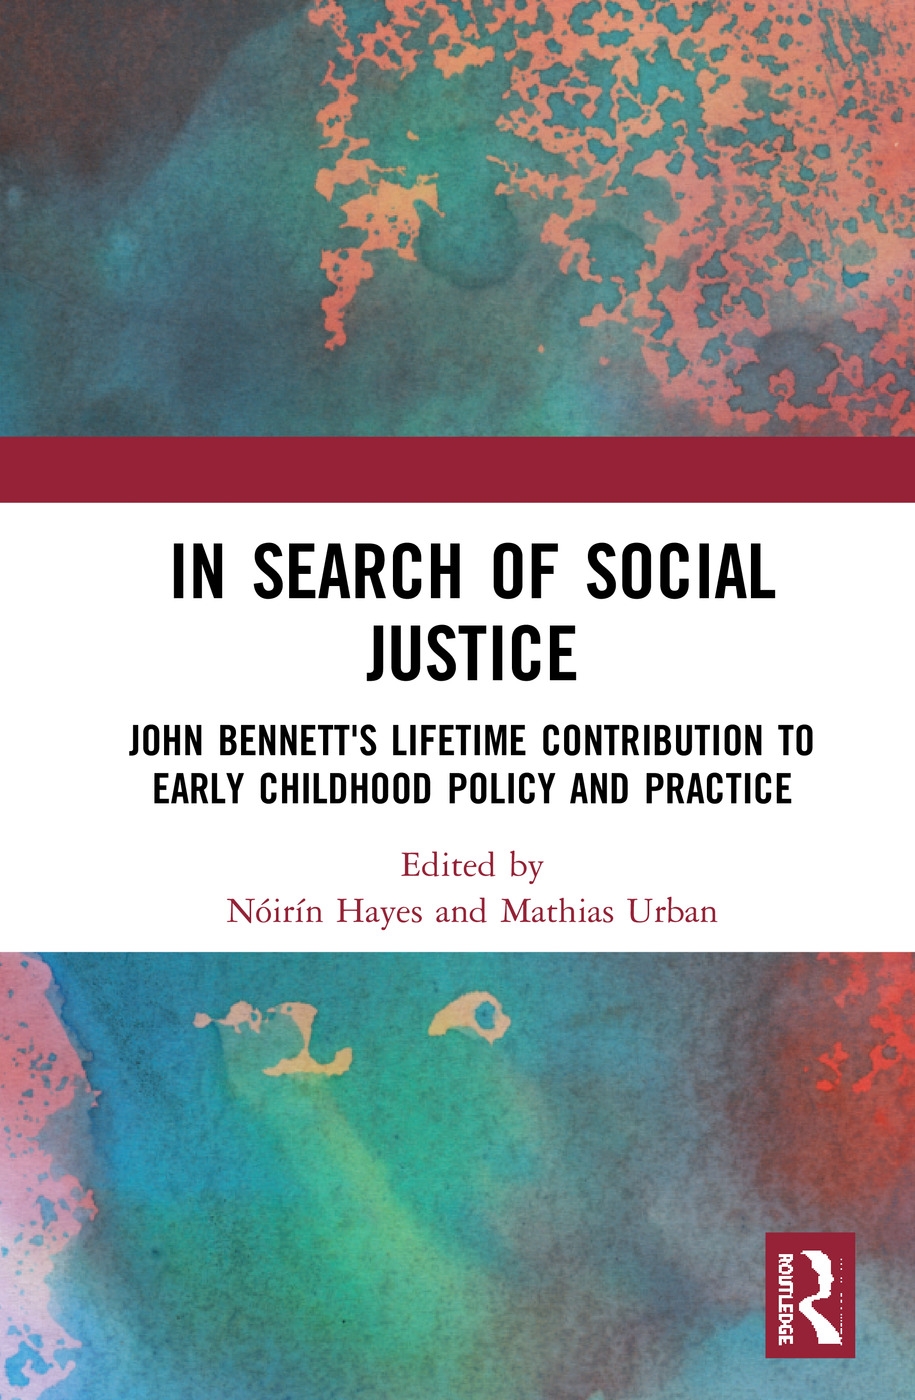 In Search of Social Justice: John Bennett’s Lifetime Contribution to Early Childhood Policy and Practice